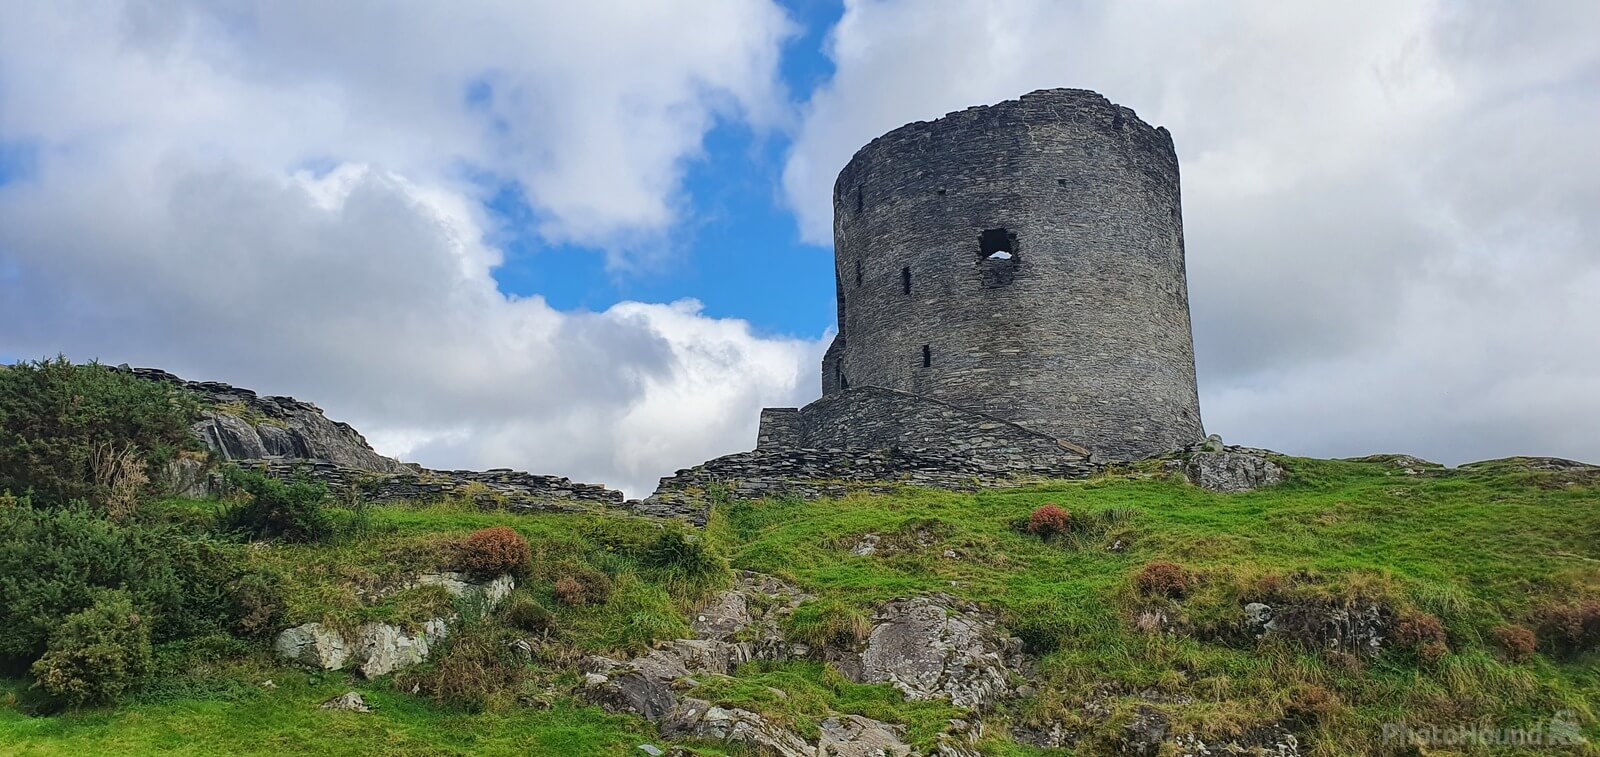 Image of Dolbadarn Castle by Leanne Lewis